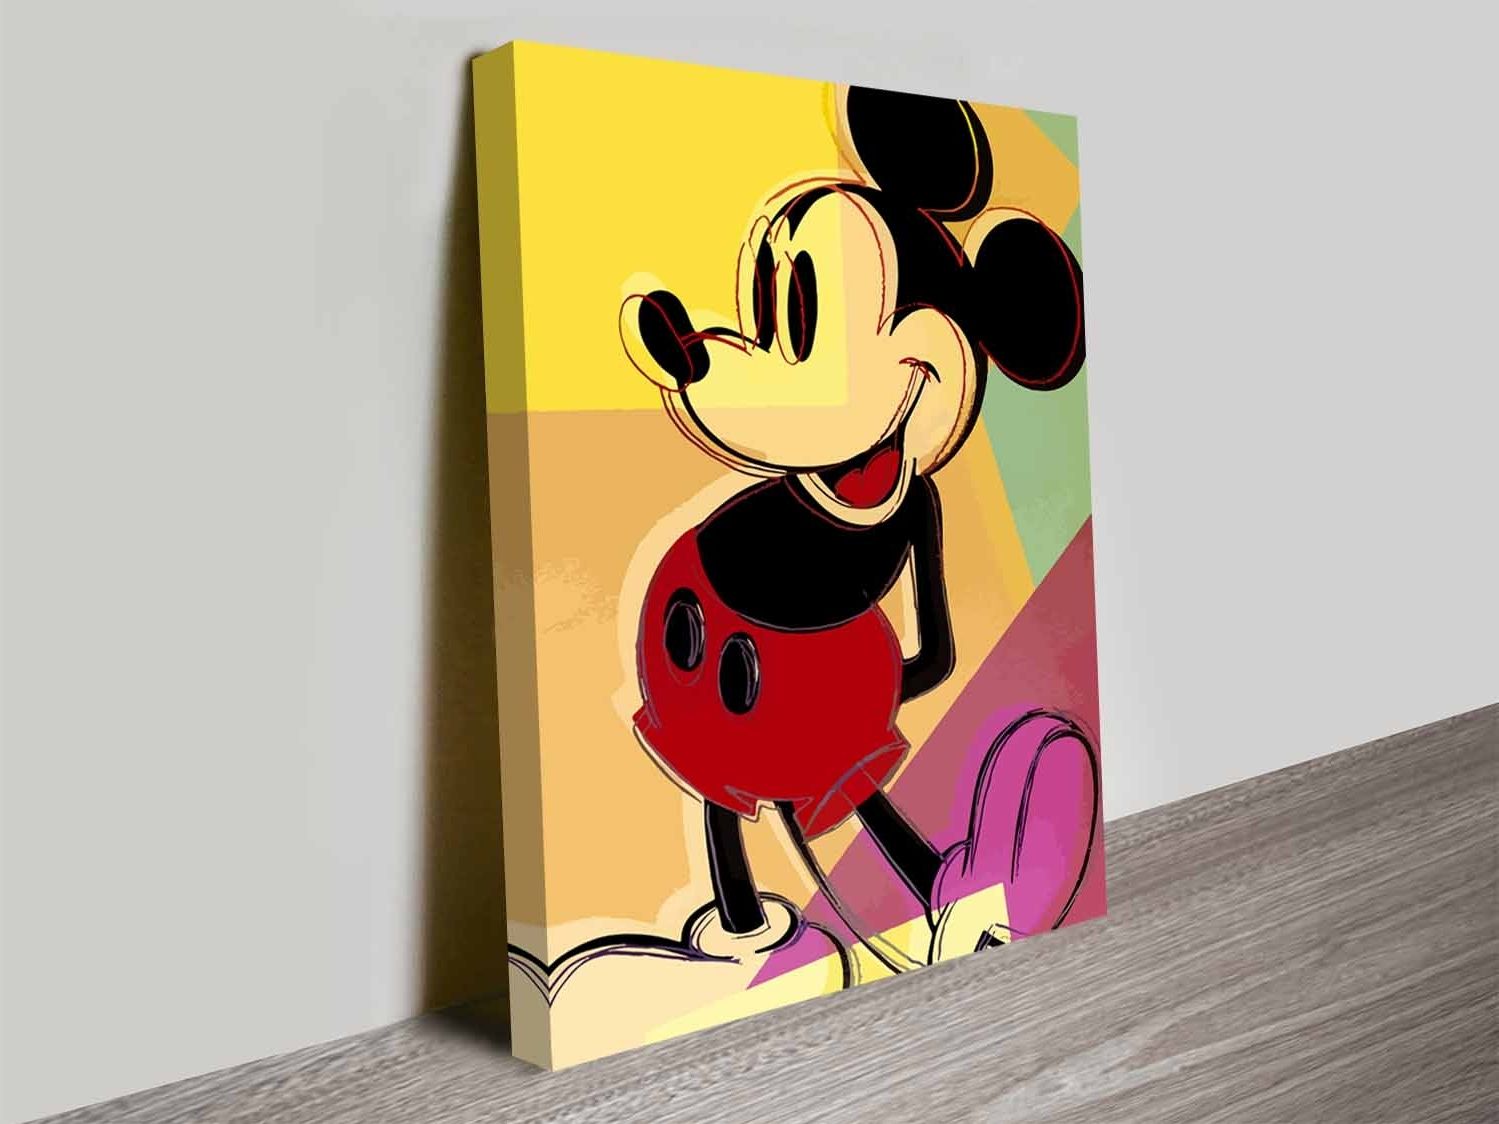 Well Known Mickey Mouse Canvas Wall Art For Mickey Mouse Andy Warhol Wall Pop Art Print On Canvas (View 6 of 15)